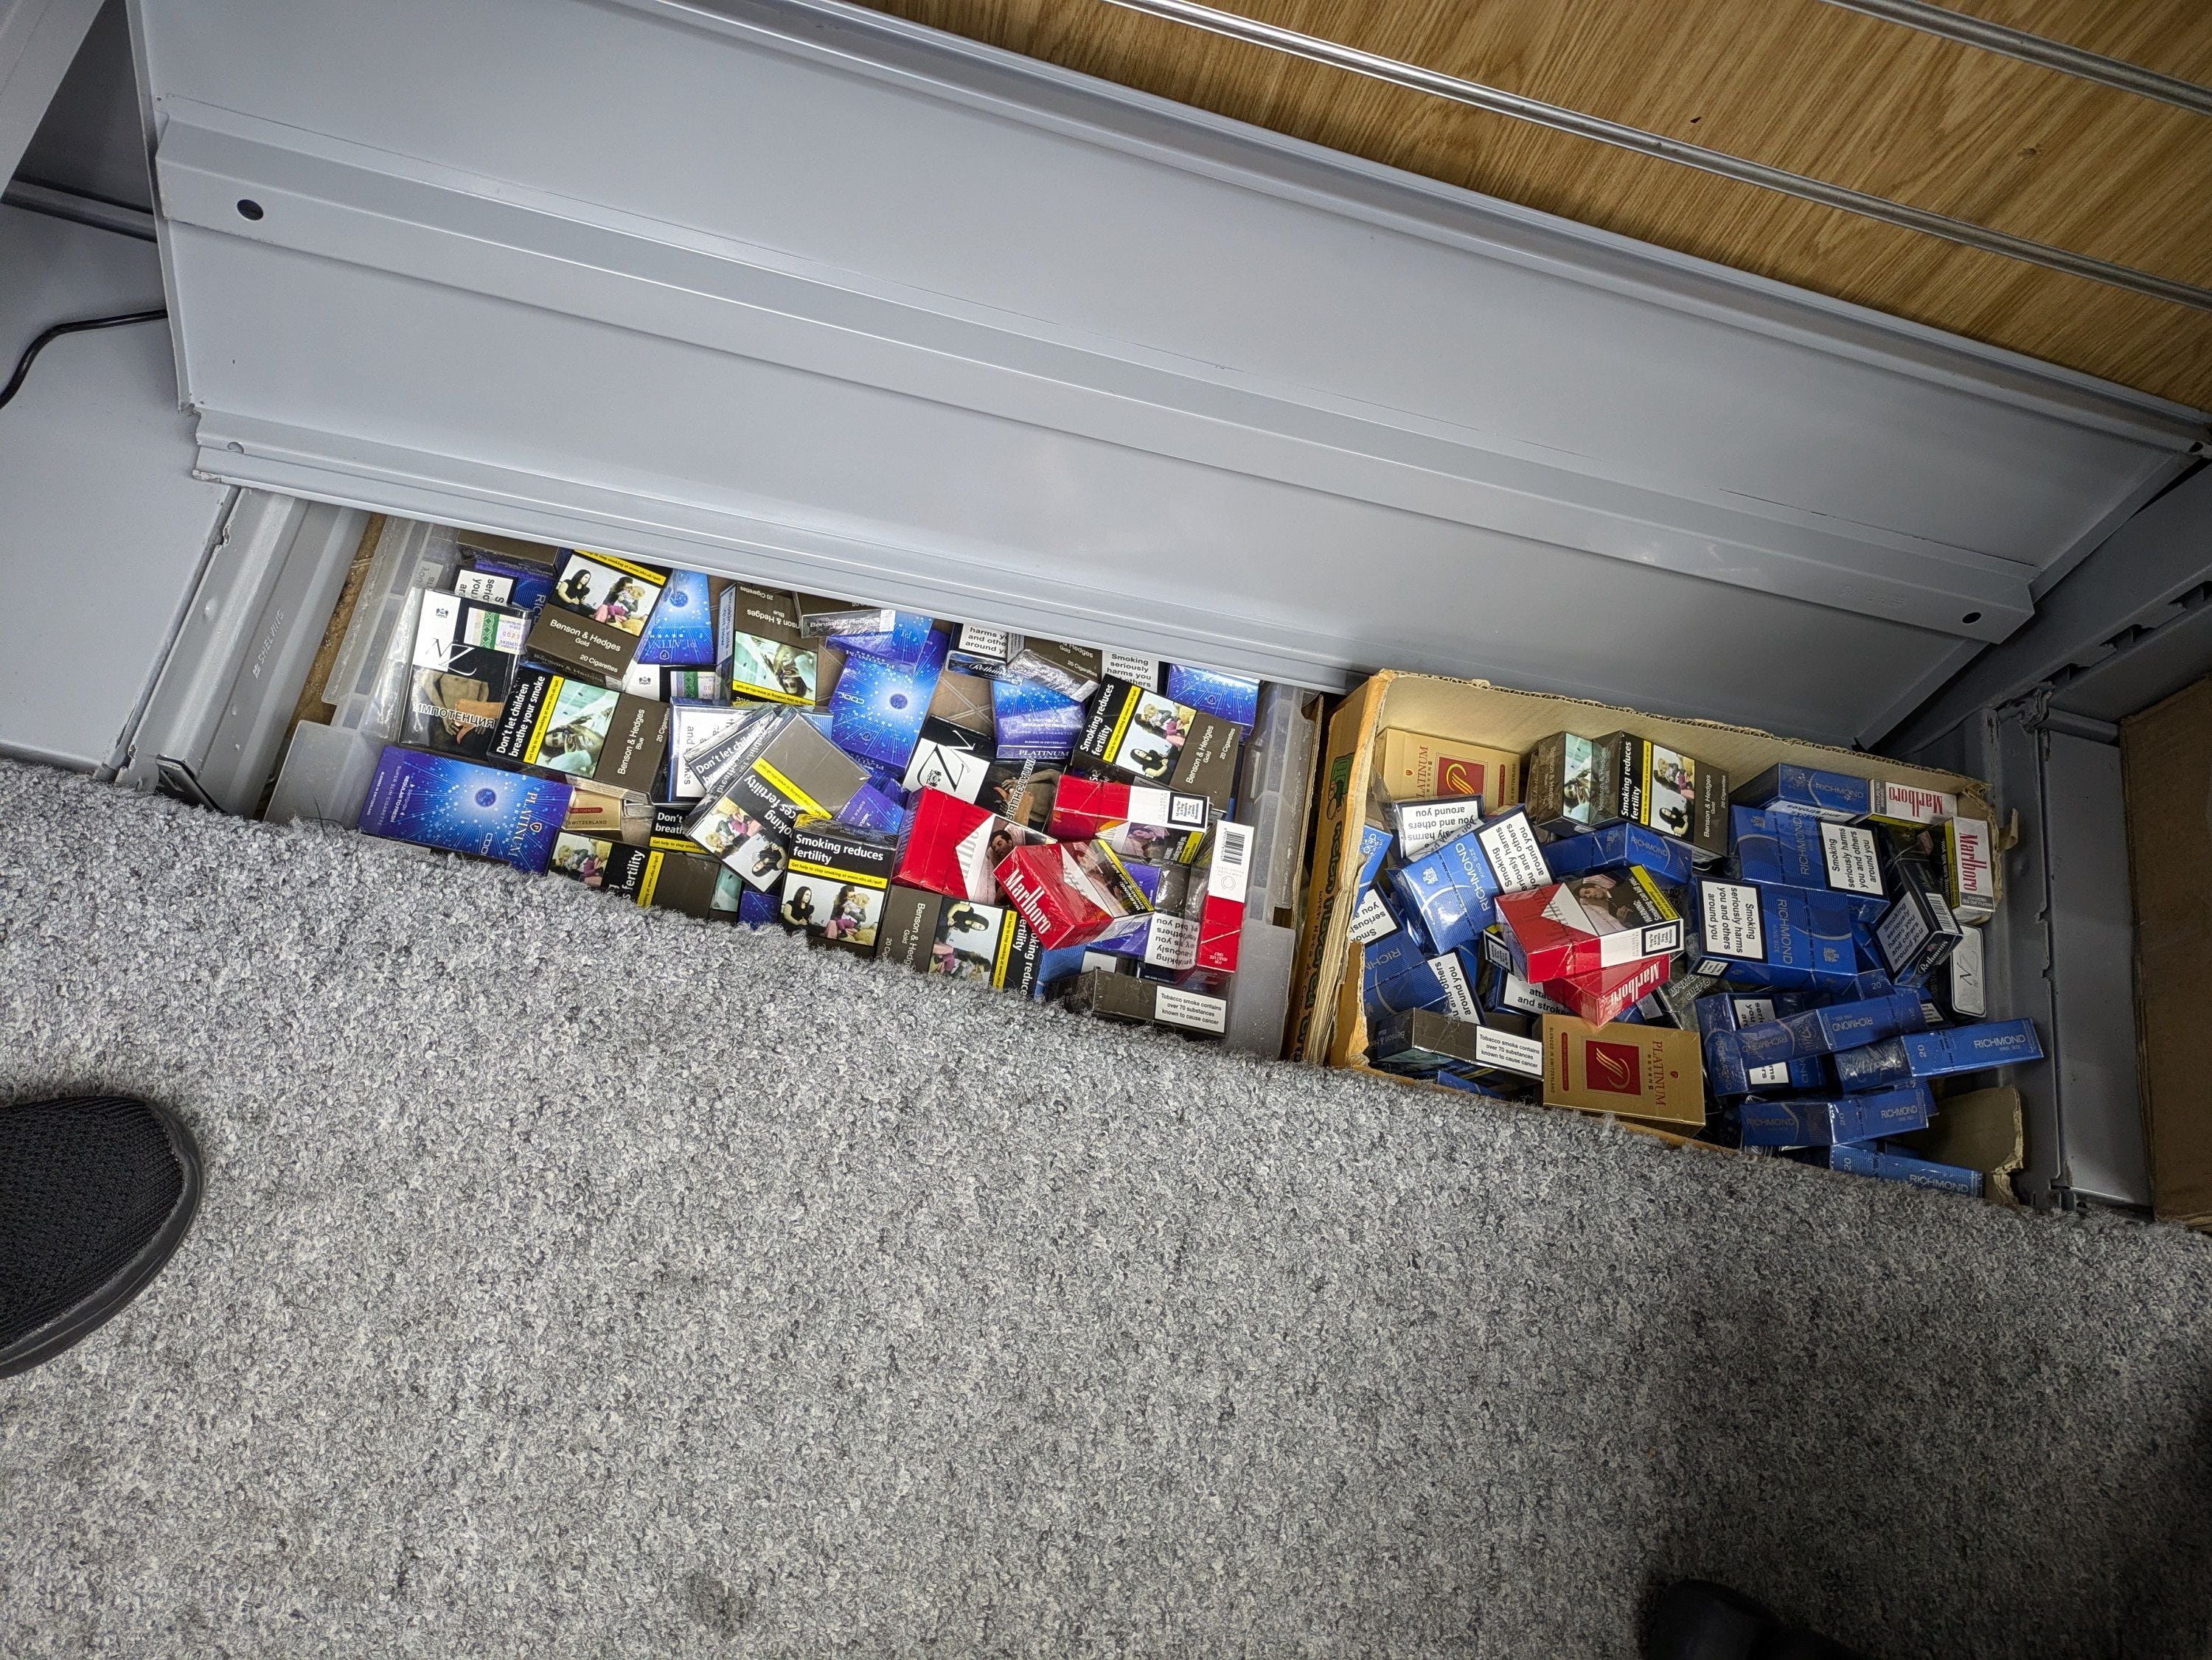 Illegal tobacco and vapes seized after good work by trading standards officers